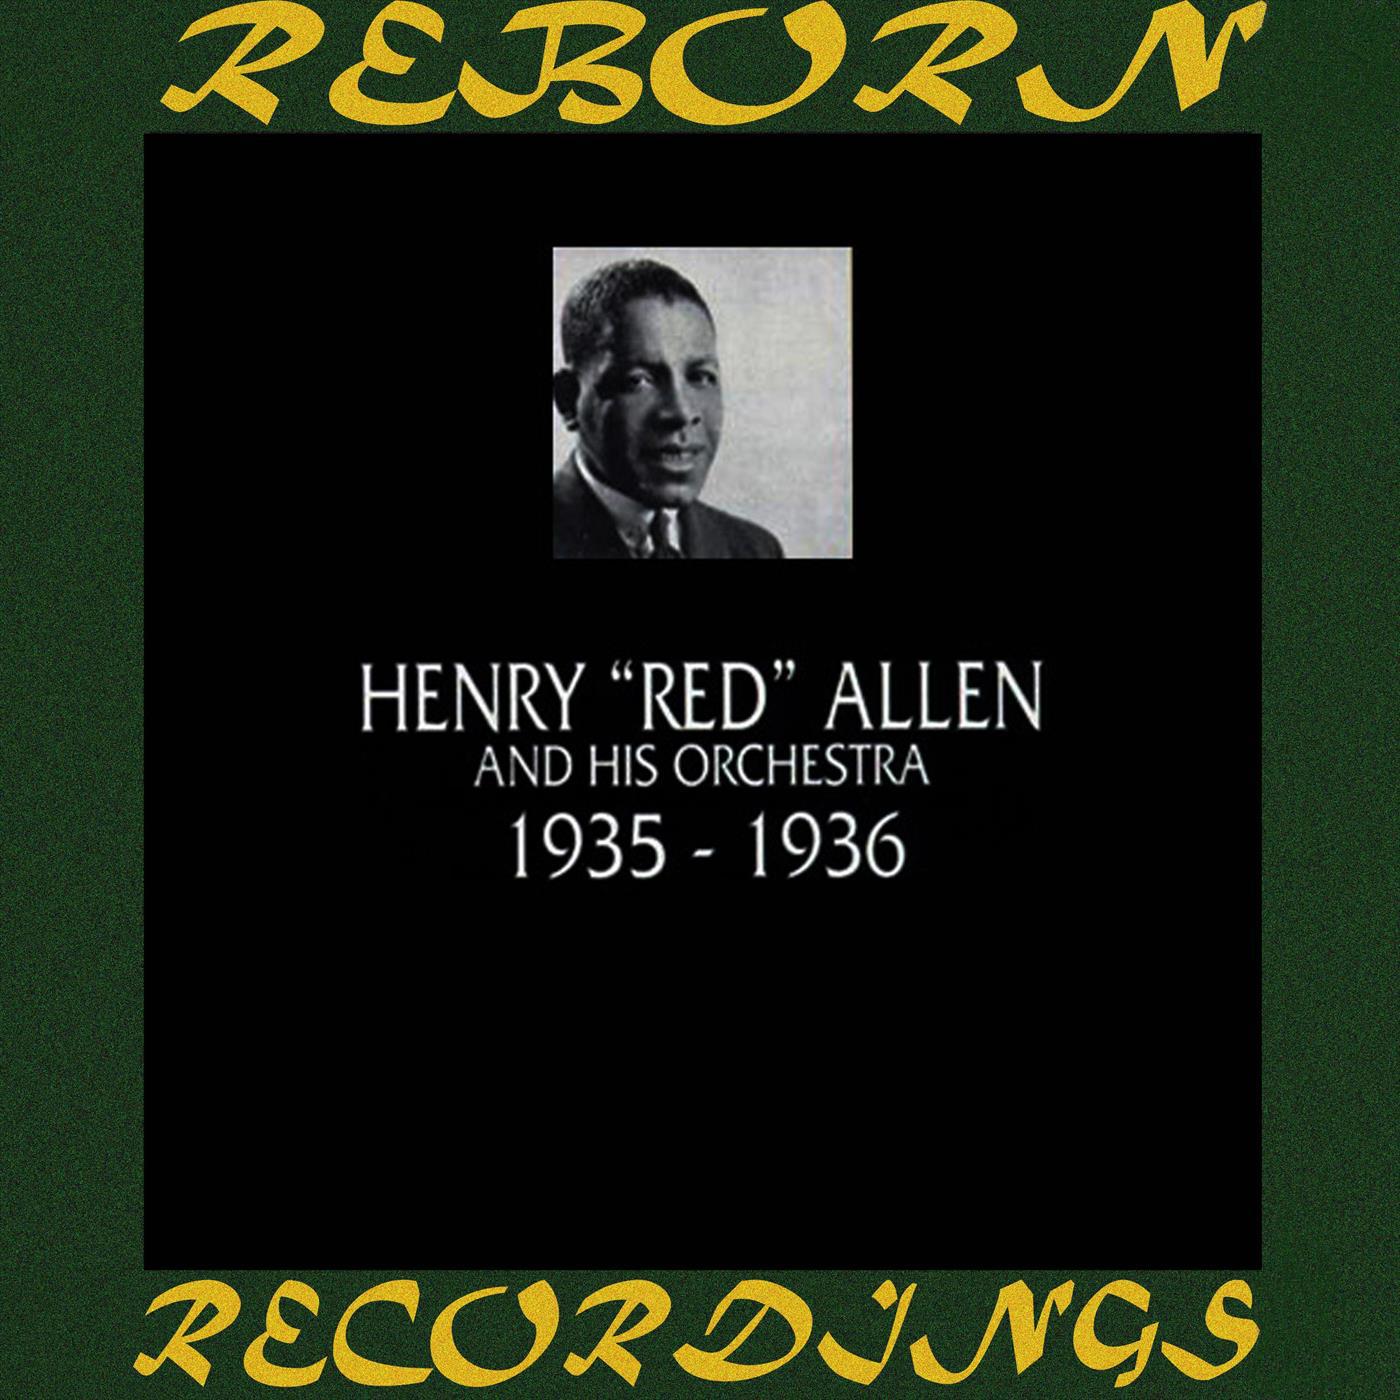 Henry Red Allen - The Touch of Your Lips